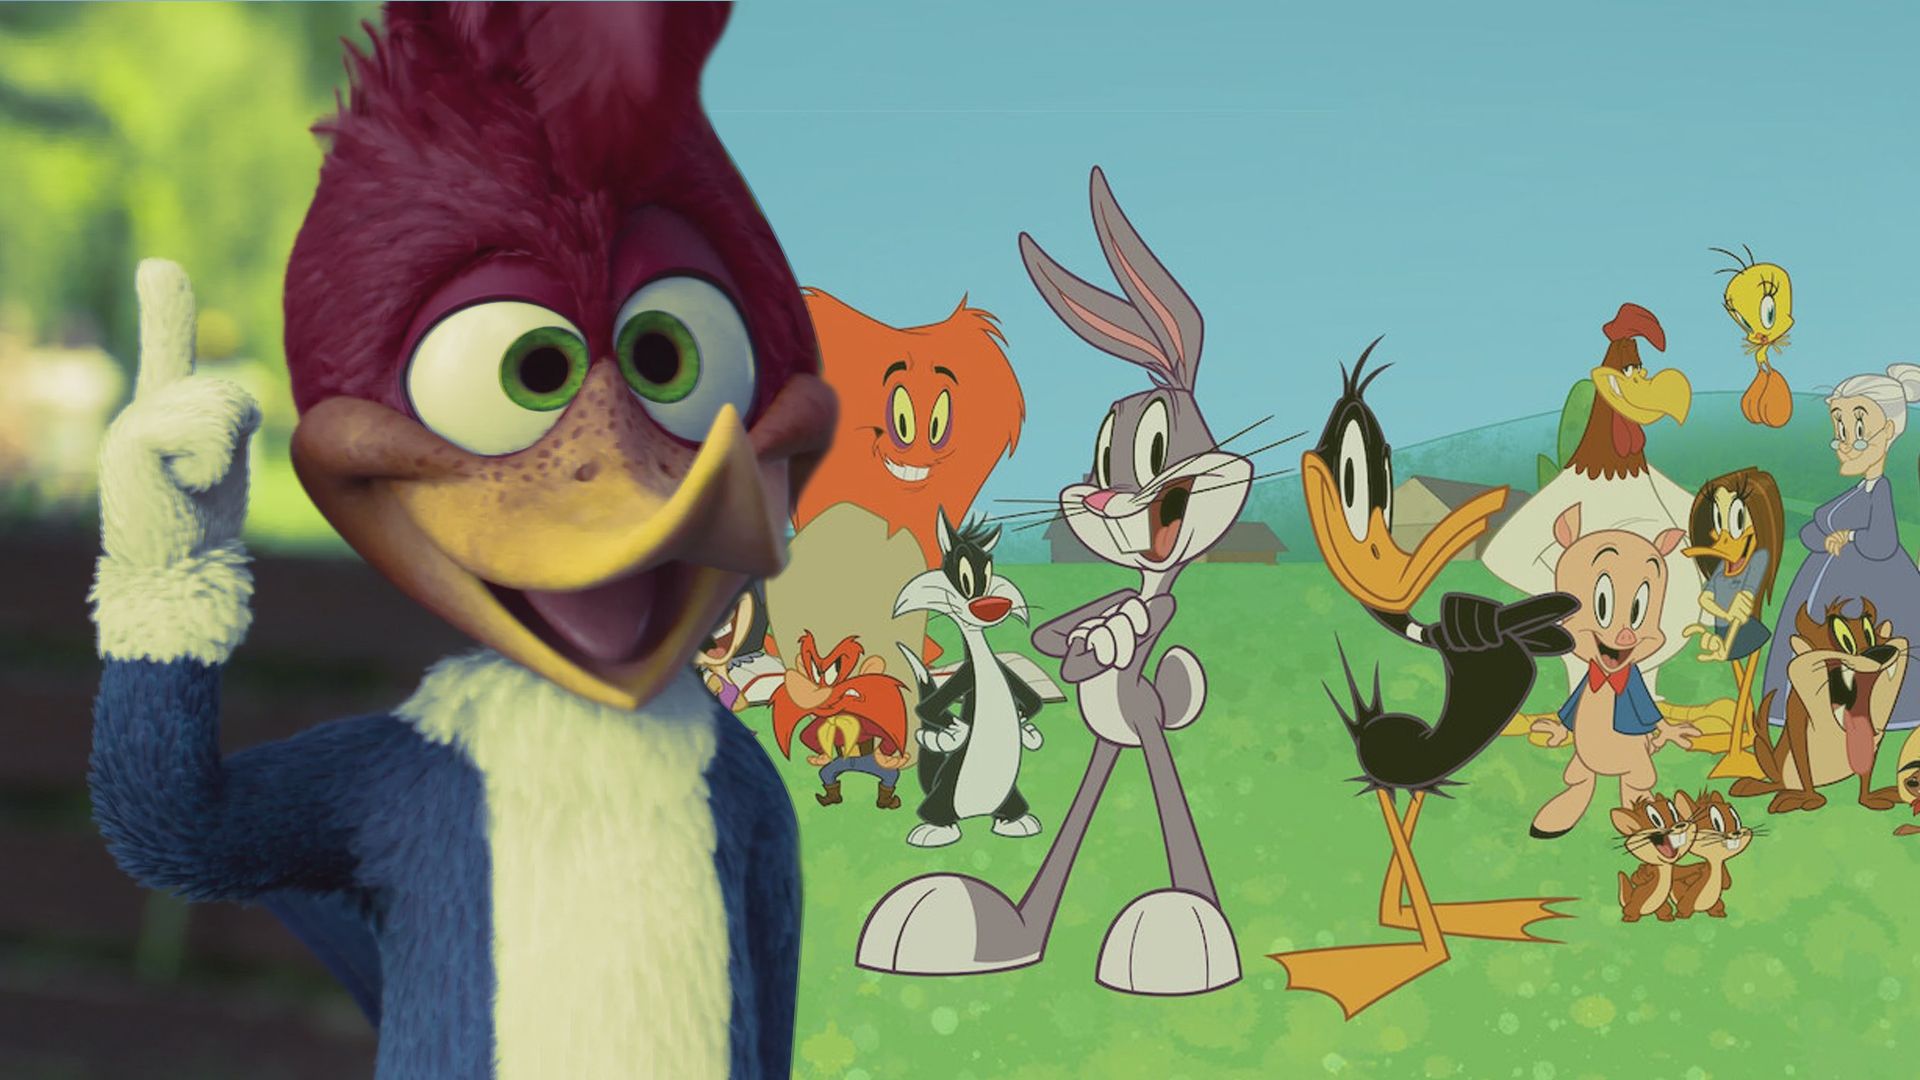 A custom image of Woody Woodpecker and the Looney Tunes